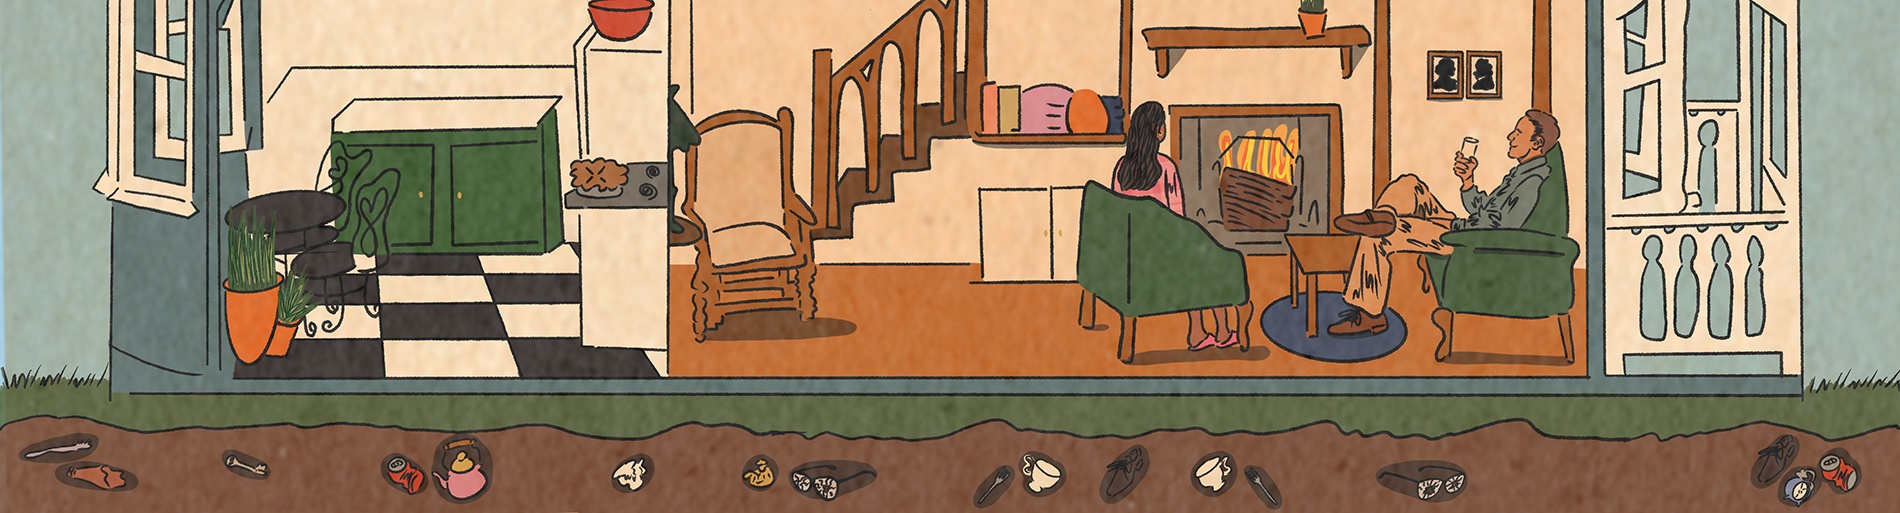 Illustration by Tatyana Alanis of a home from the early 1900s and artifacts buried under the house.